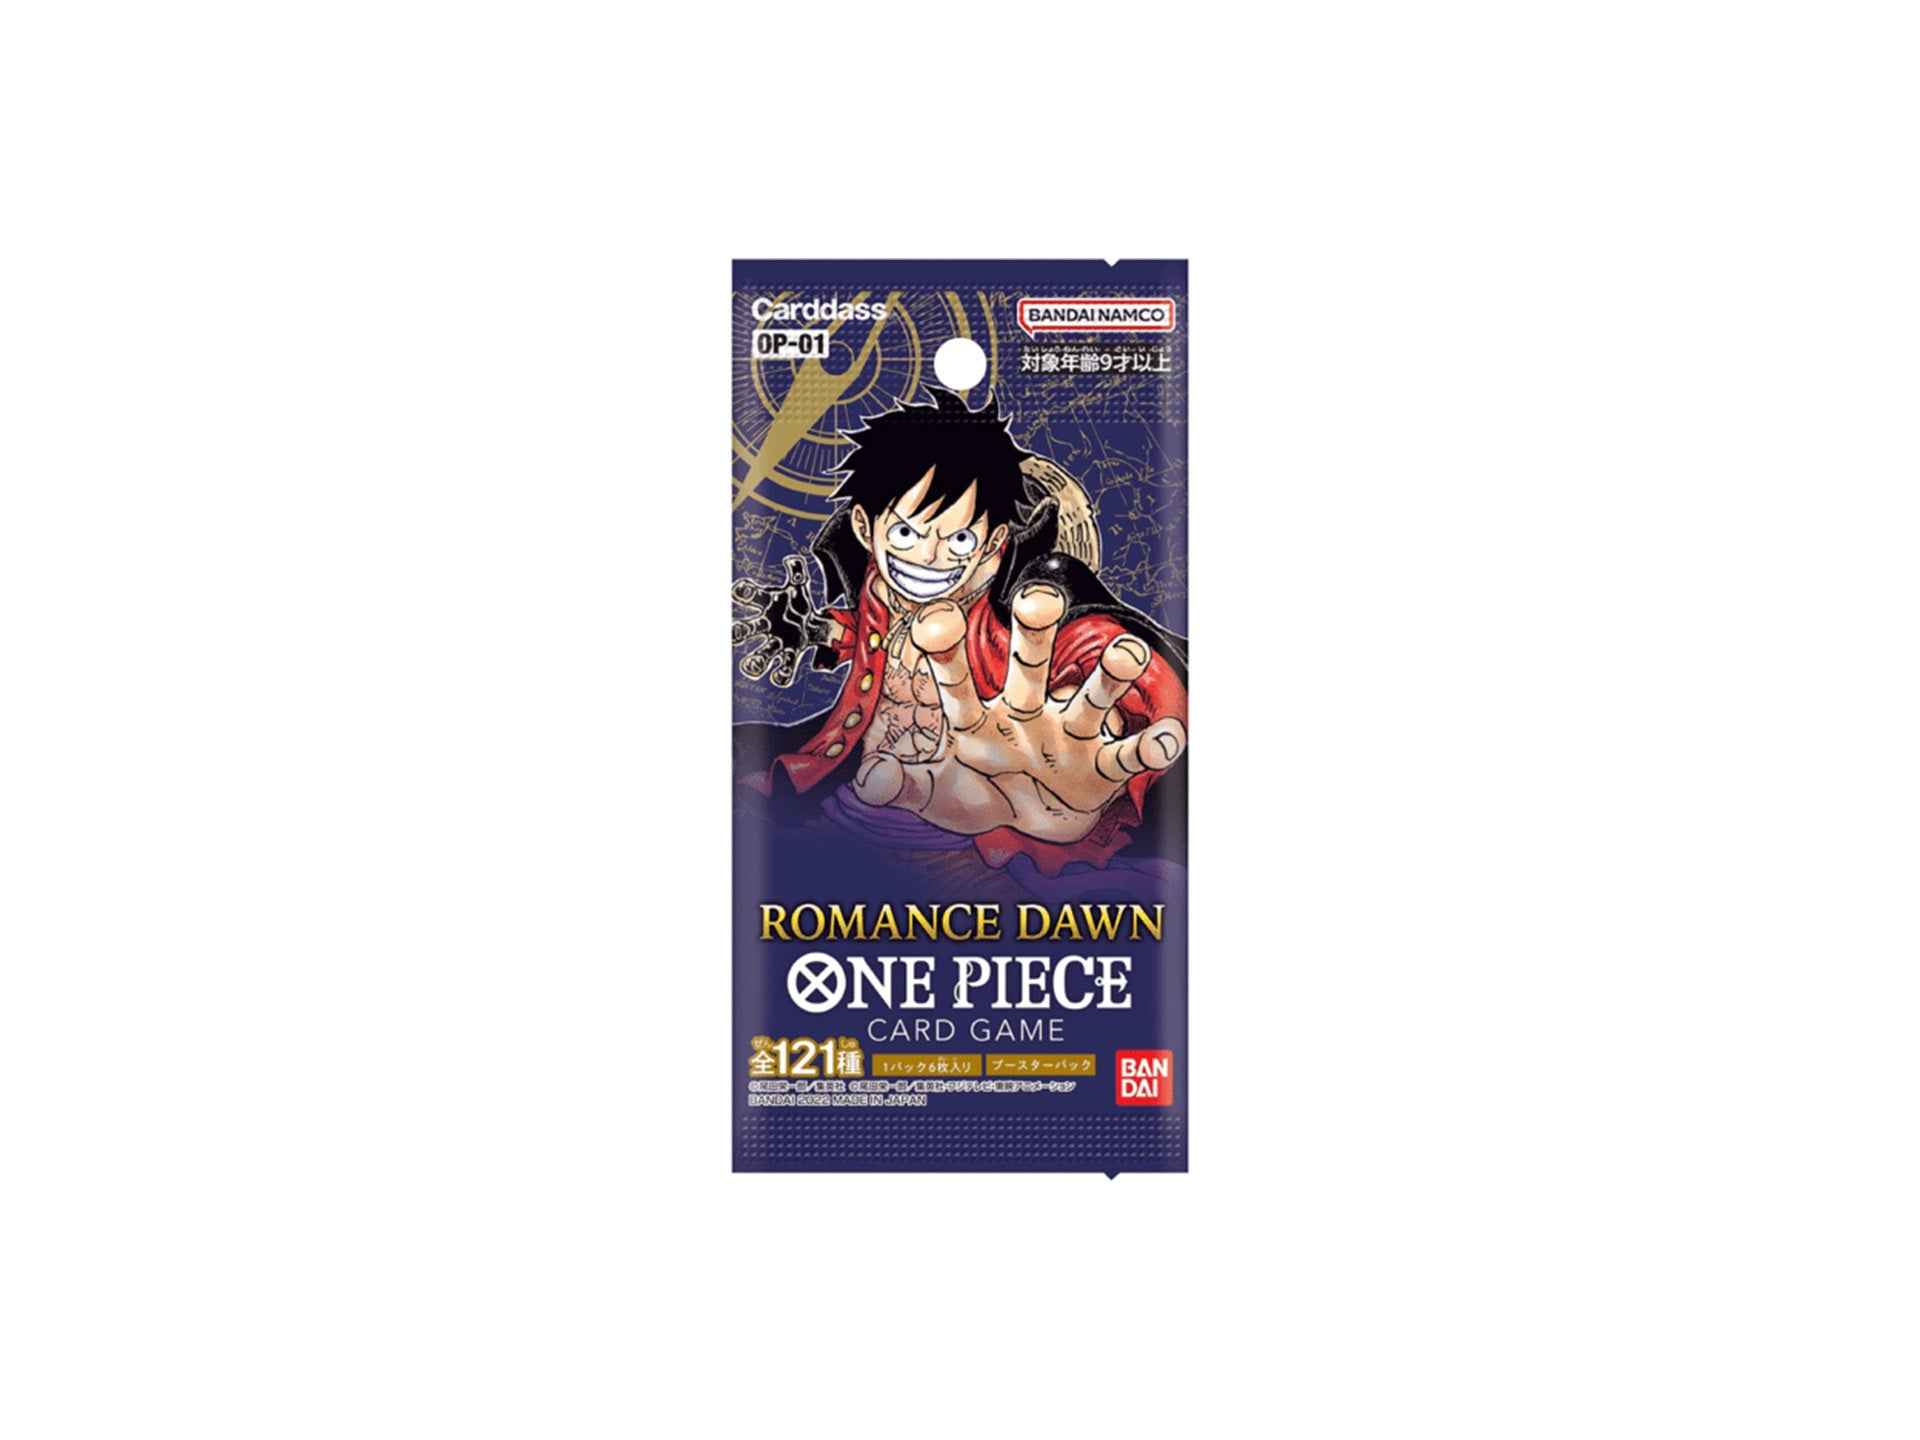 One Piece Boosterpack Japans OP-01